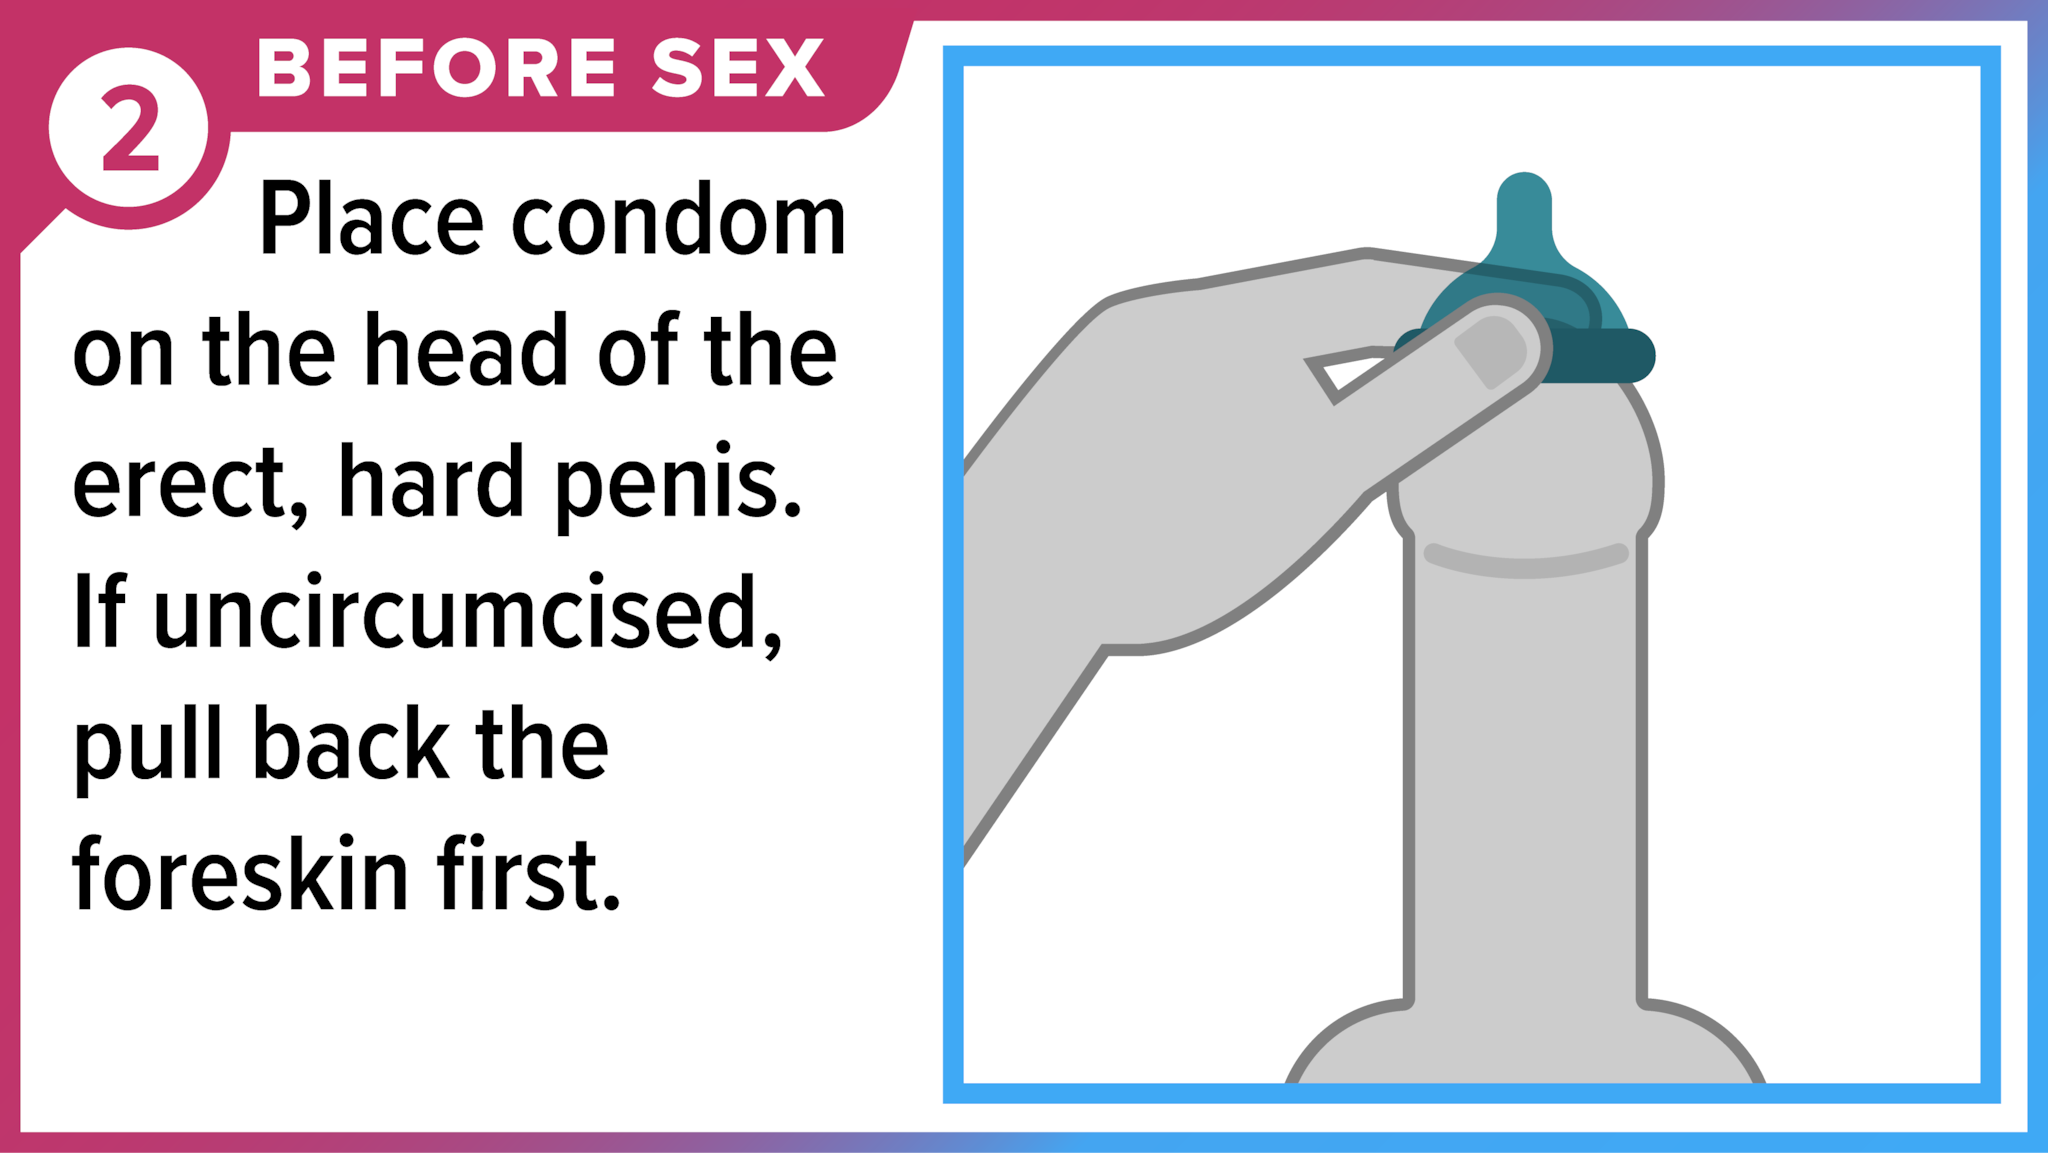 Hand placing condom on tip of penis. Before sex, place condom on the head of penis. If uncircumcised, pull back the foreskin first.